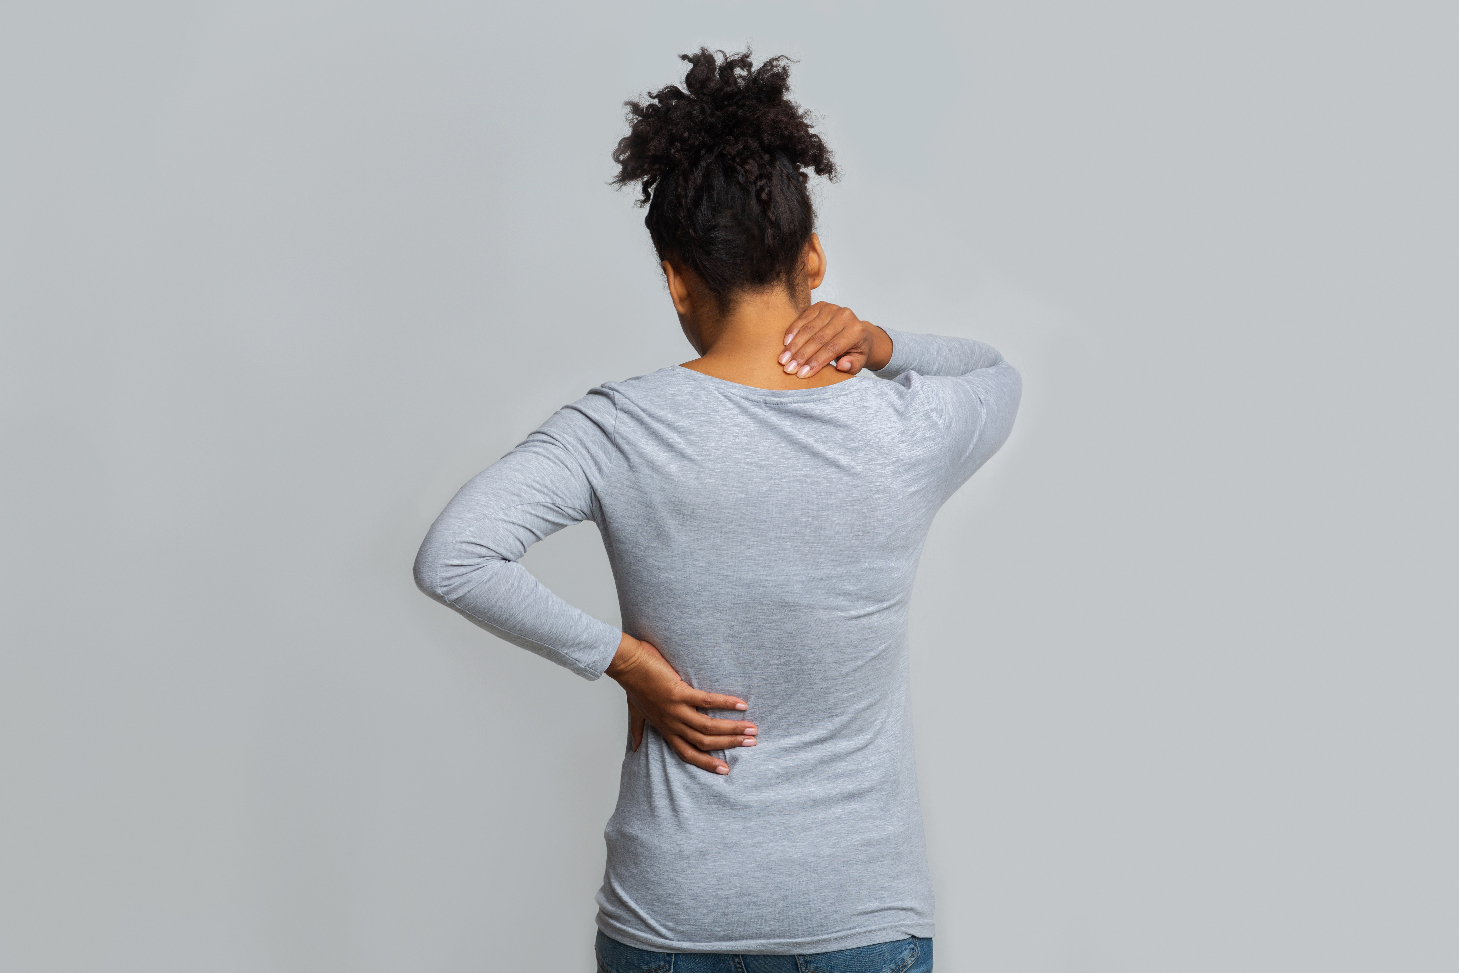 Should You Use Ice or Heat for Back Pain?